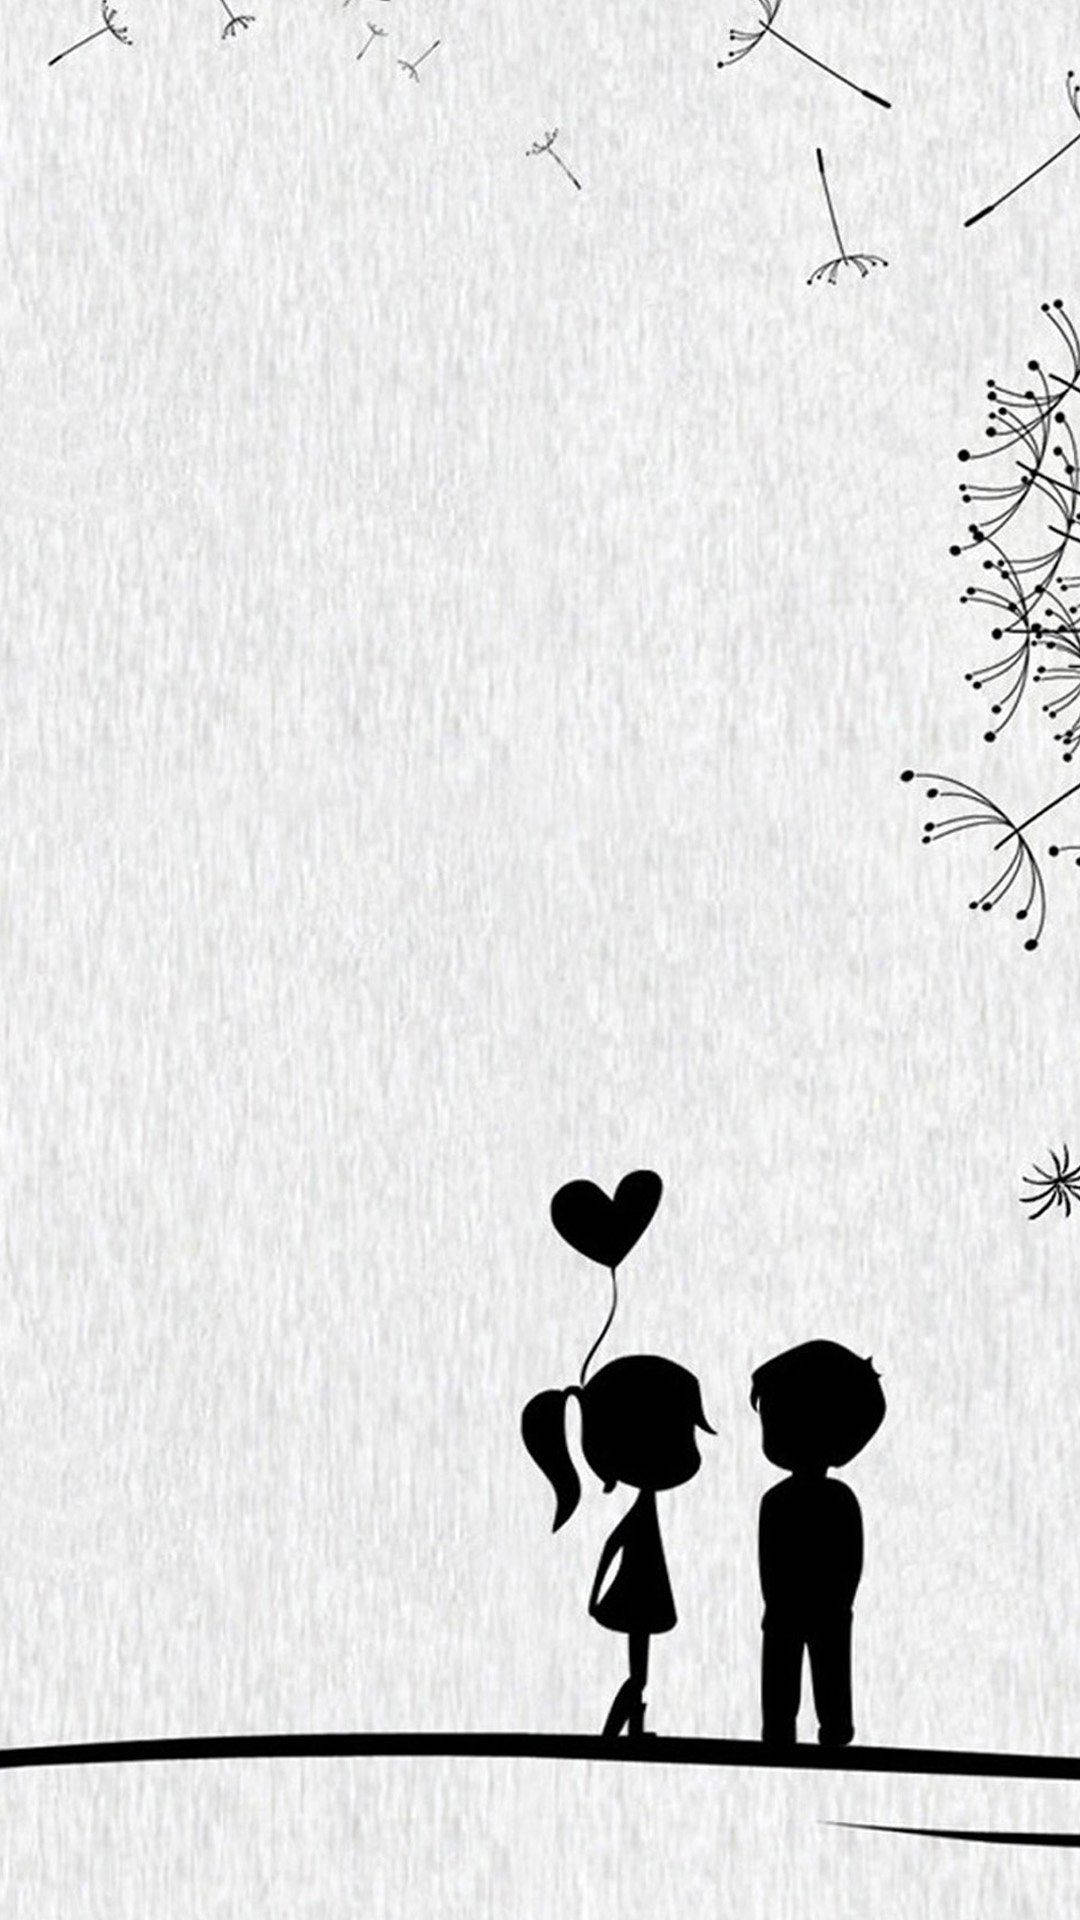 Cute Couple Silhouette With Heart Balloon